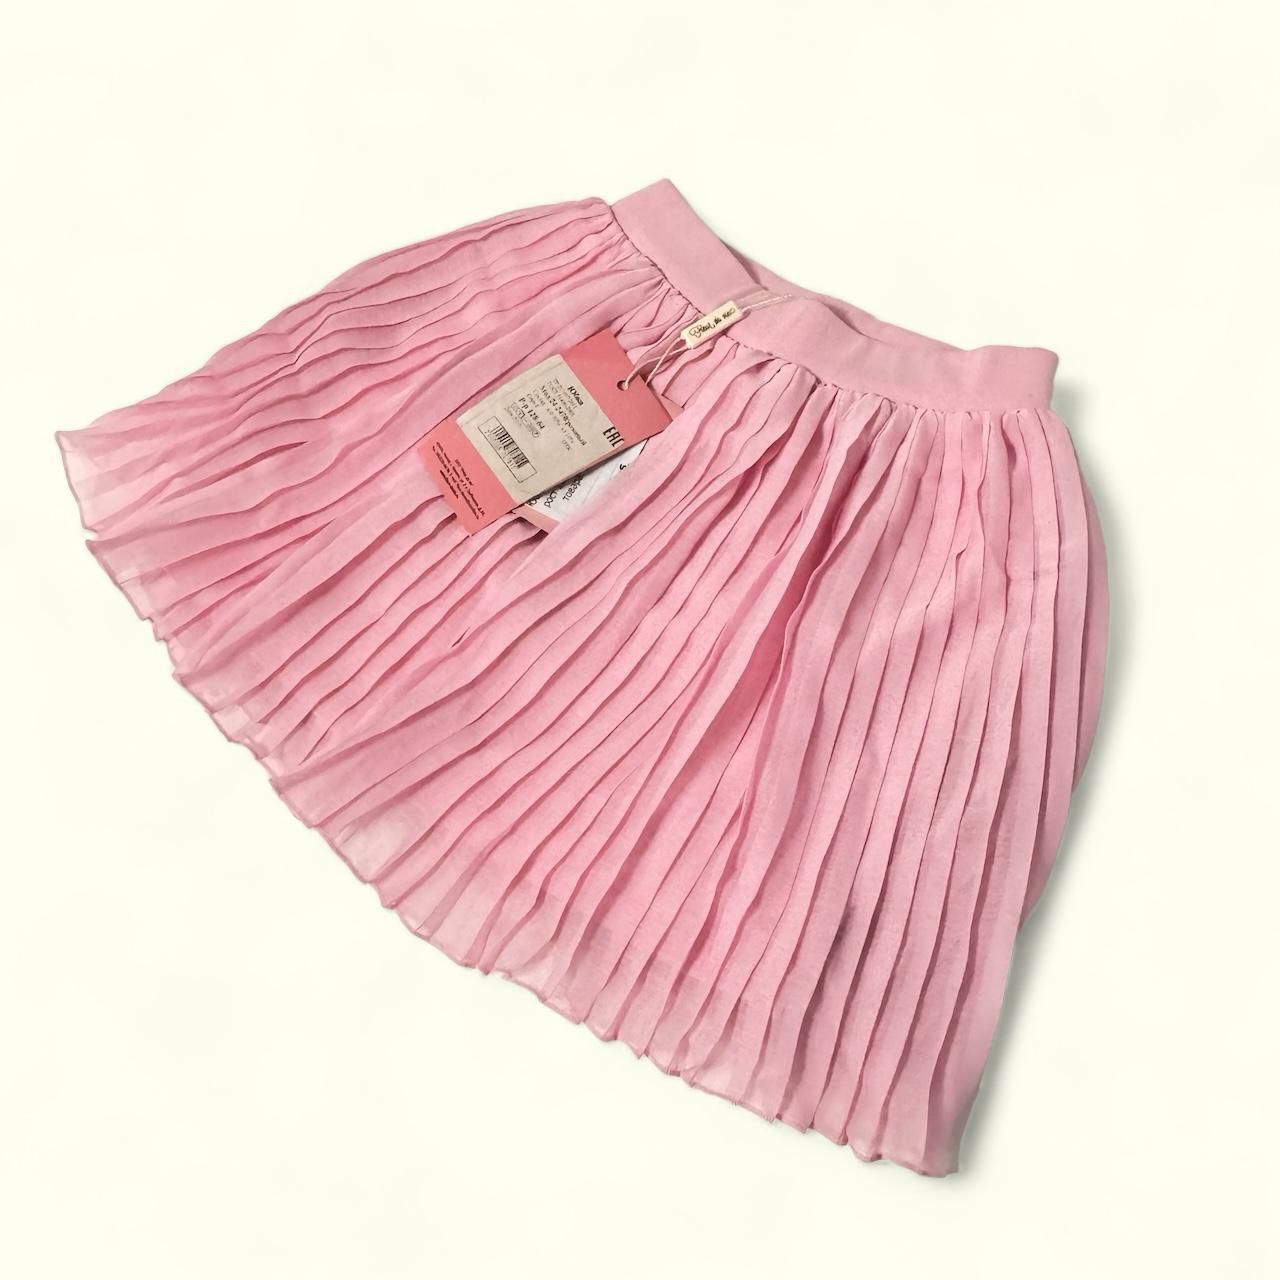 Cotton Skirt For kids 8 Years Old, Gymnastic 